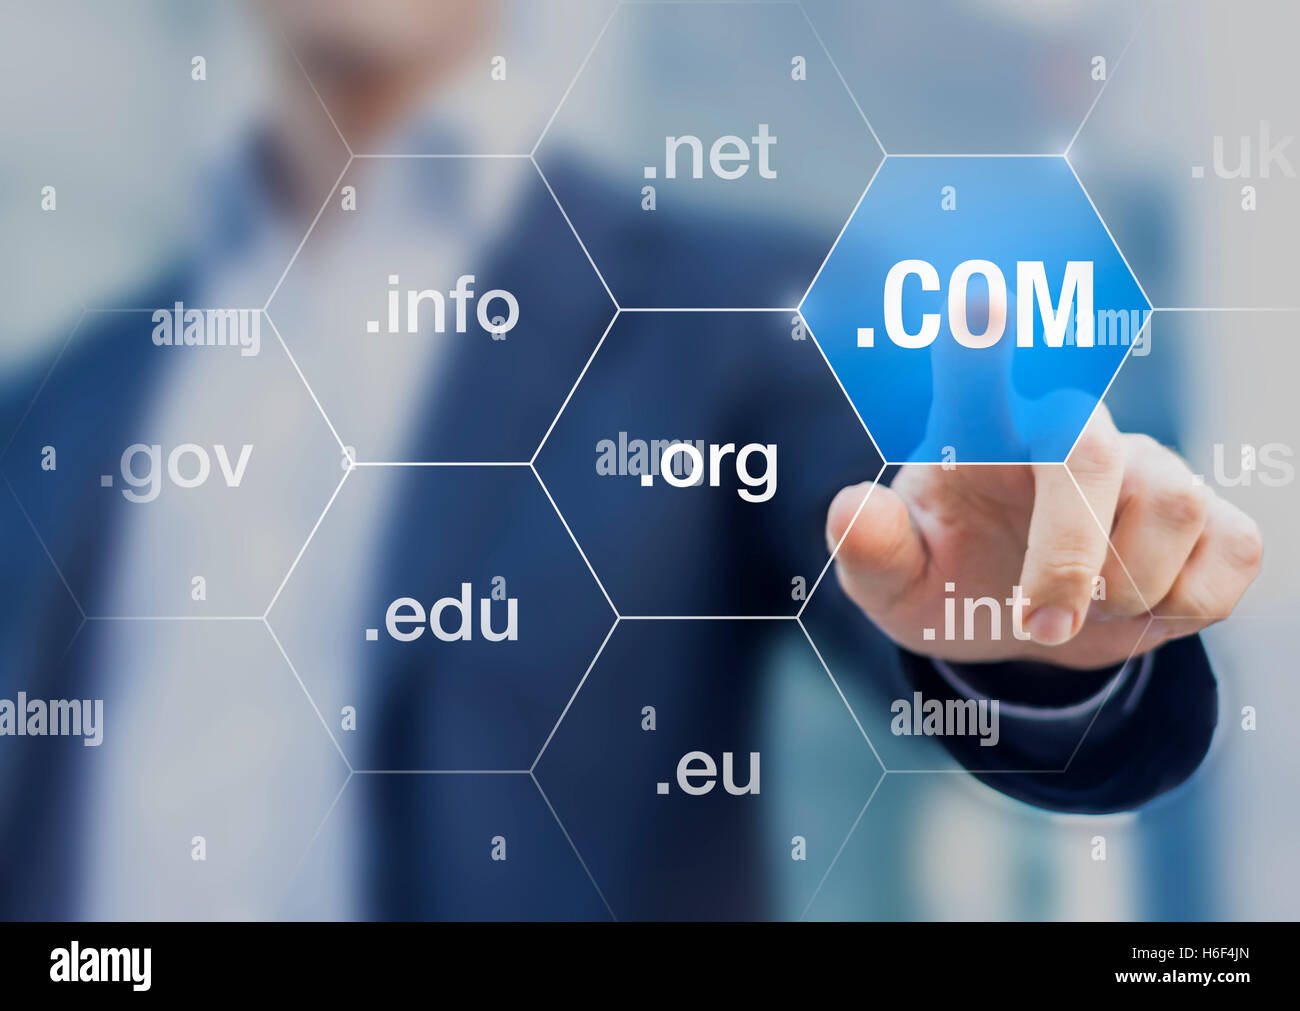 Concept about international domain names on internet for websites on a screen, such as .com, .org, .net, and .info Stock Photo